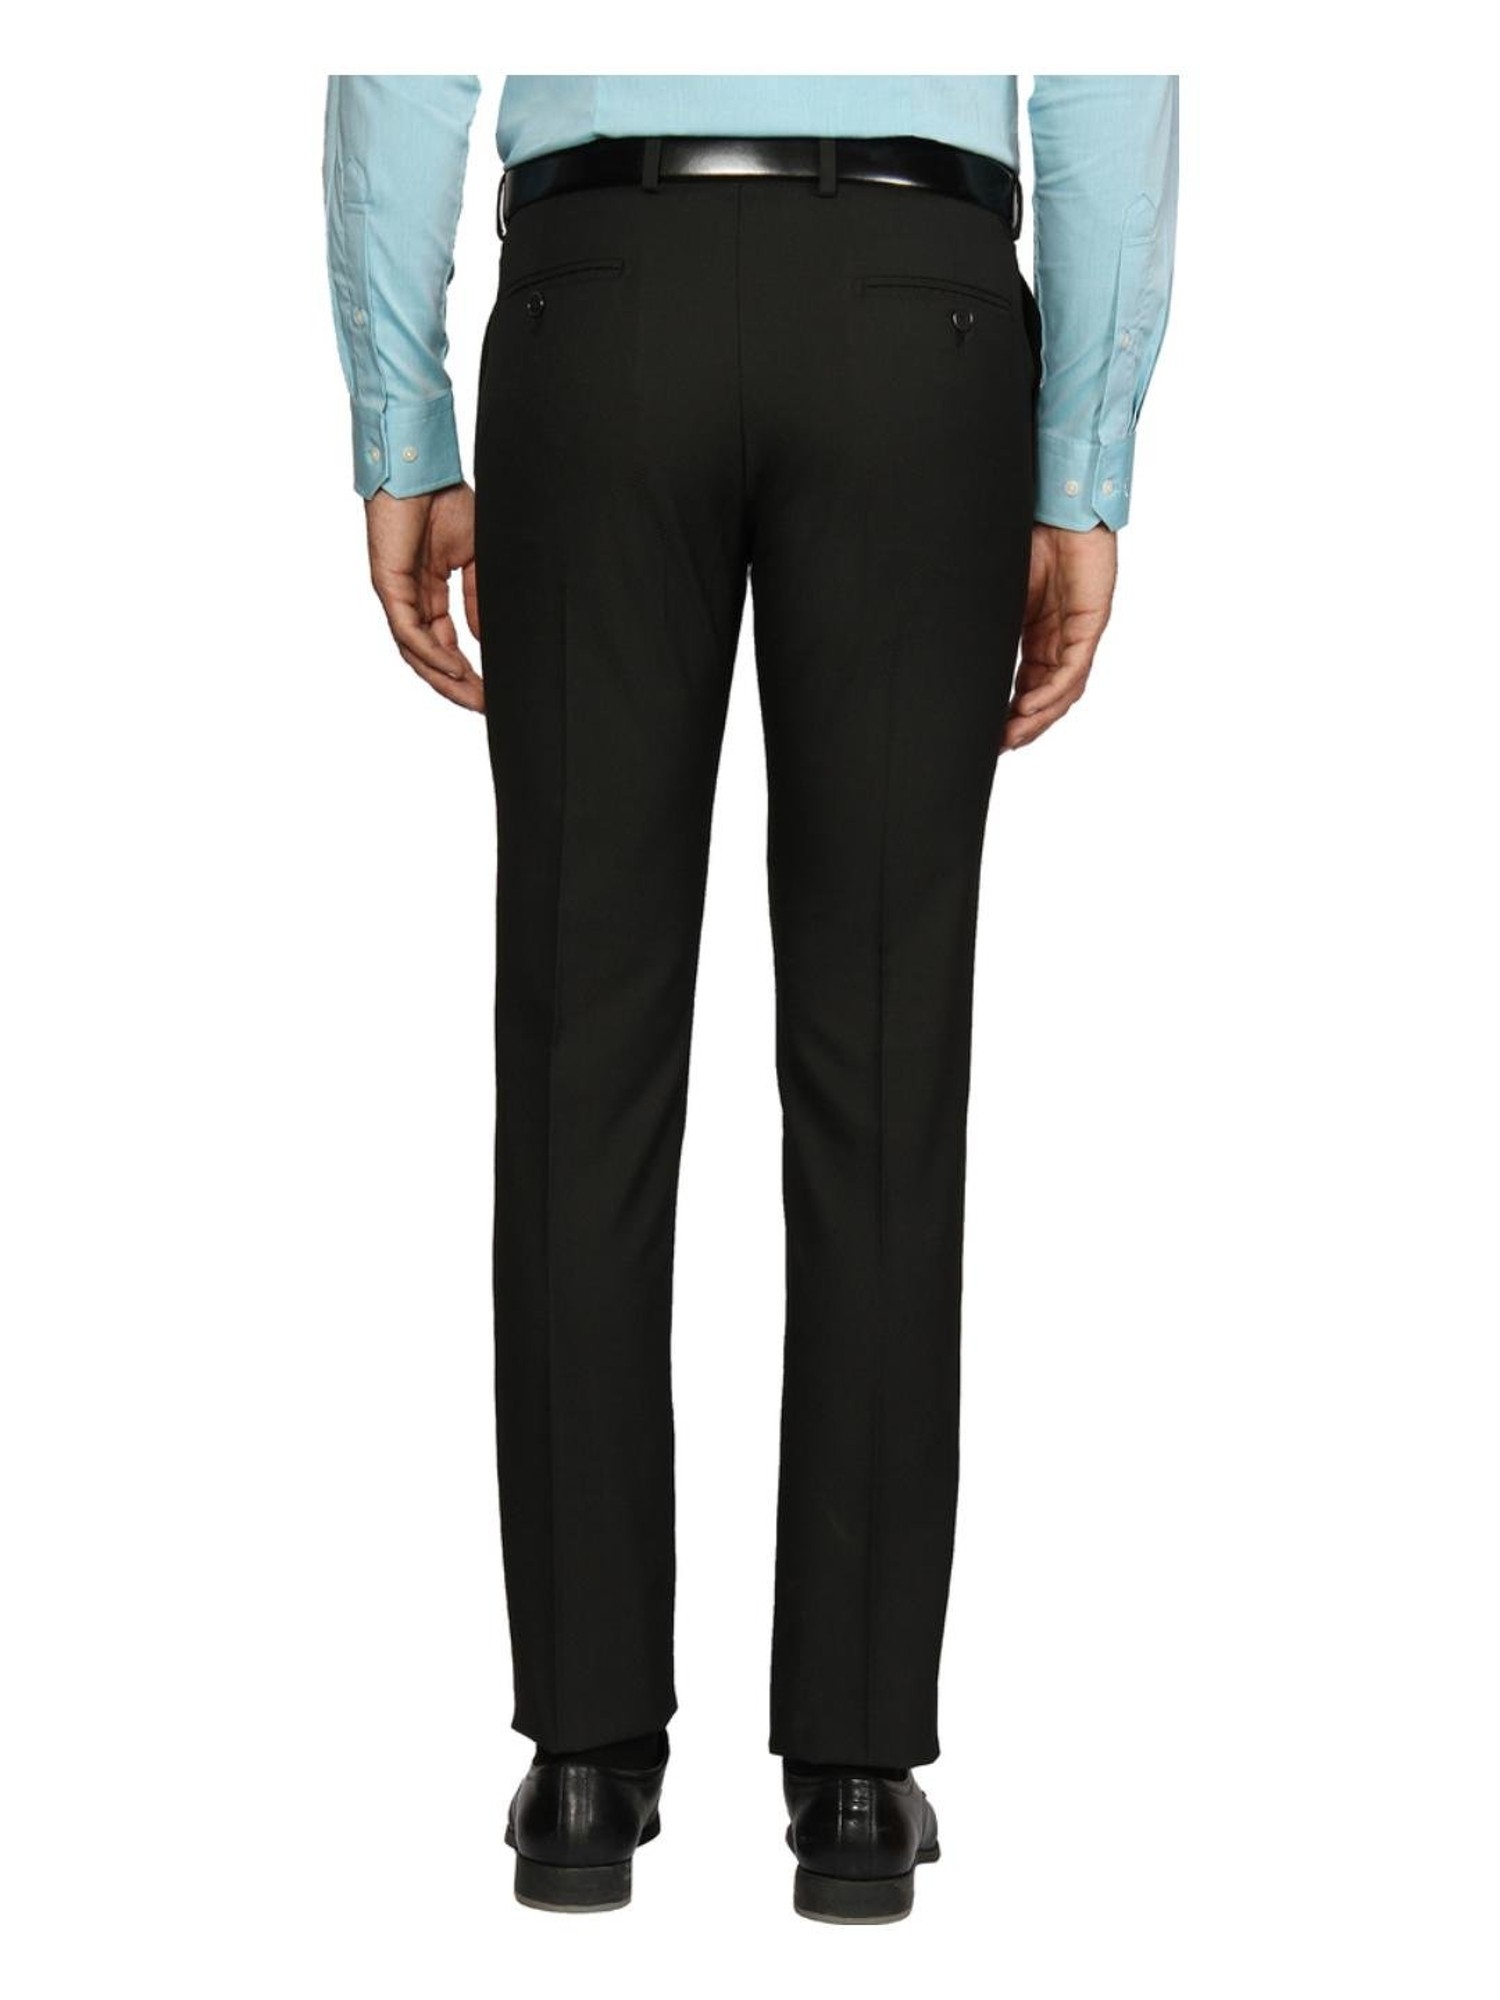 Buy blackberrys Men's Solid Cotton Slim Fit Trousers Green at Amazon.in